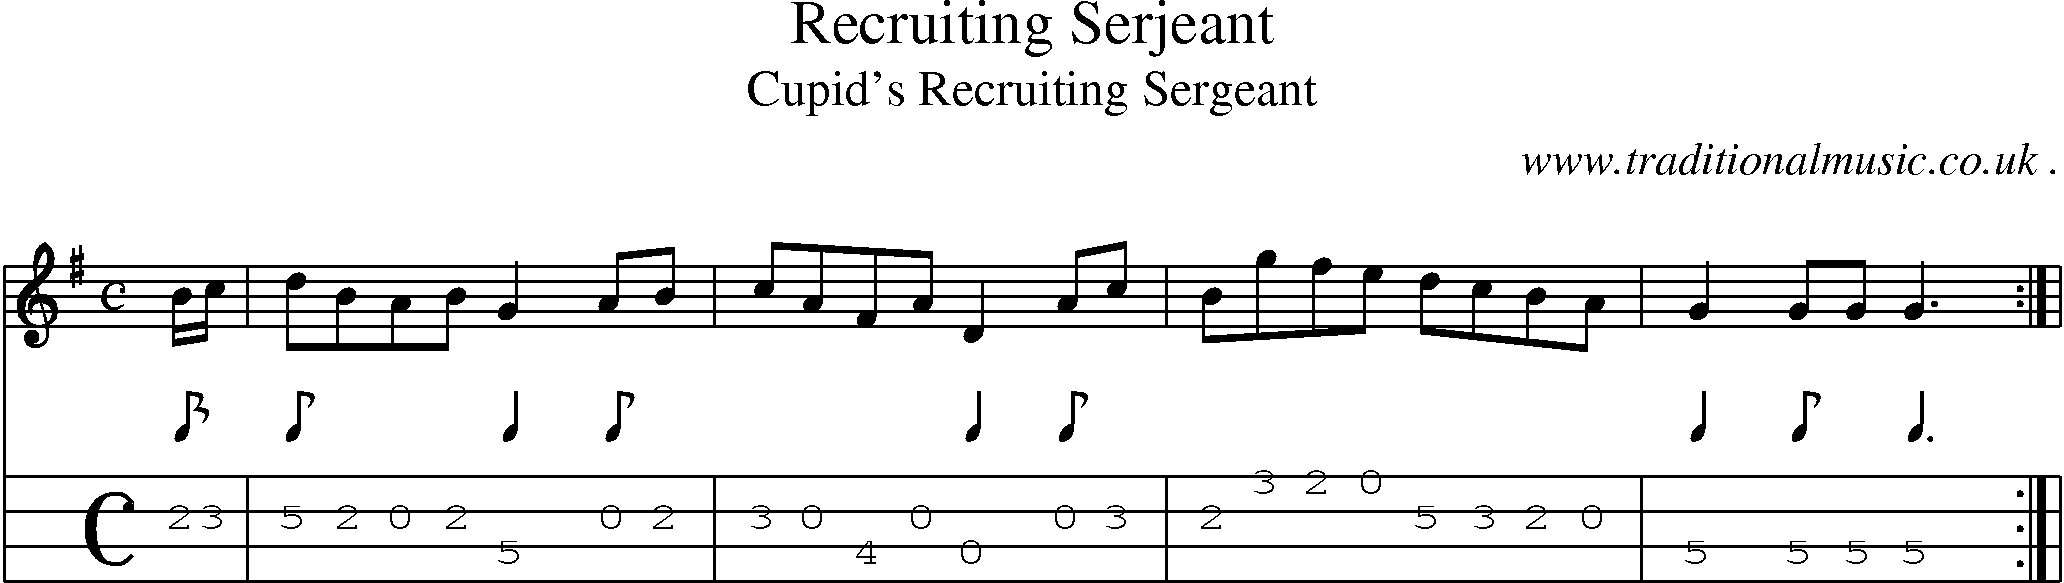 Sheet-Music and Mandolin Tabs for Recruiting Serjeant